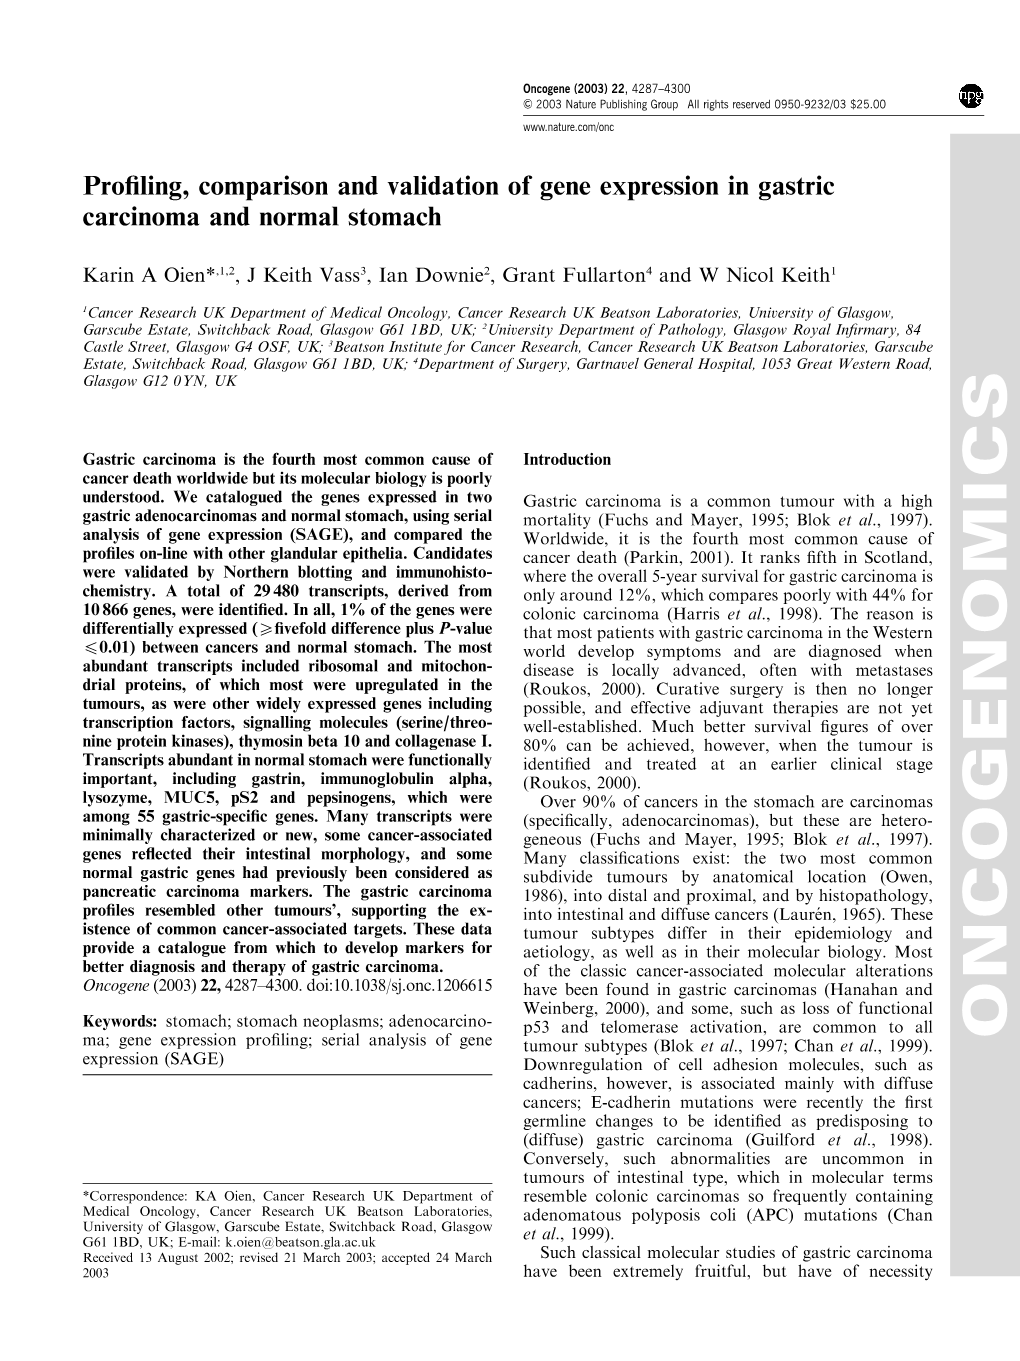 Profiling, Comparison and Validation of Gene Expression in Gastric